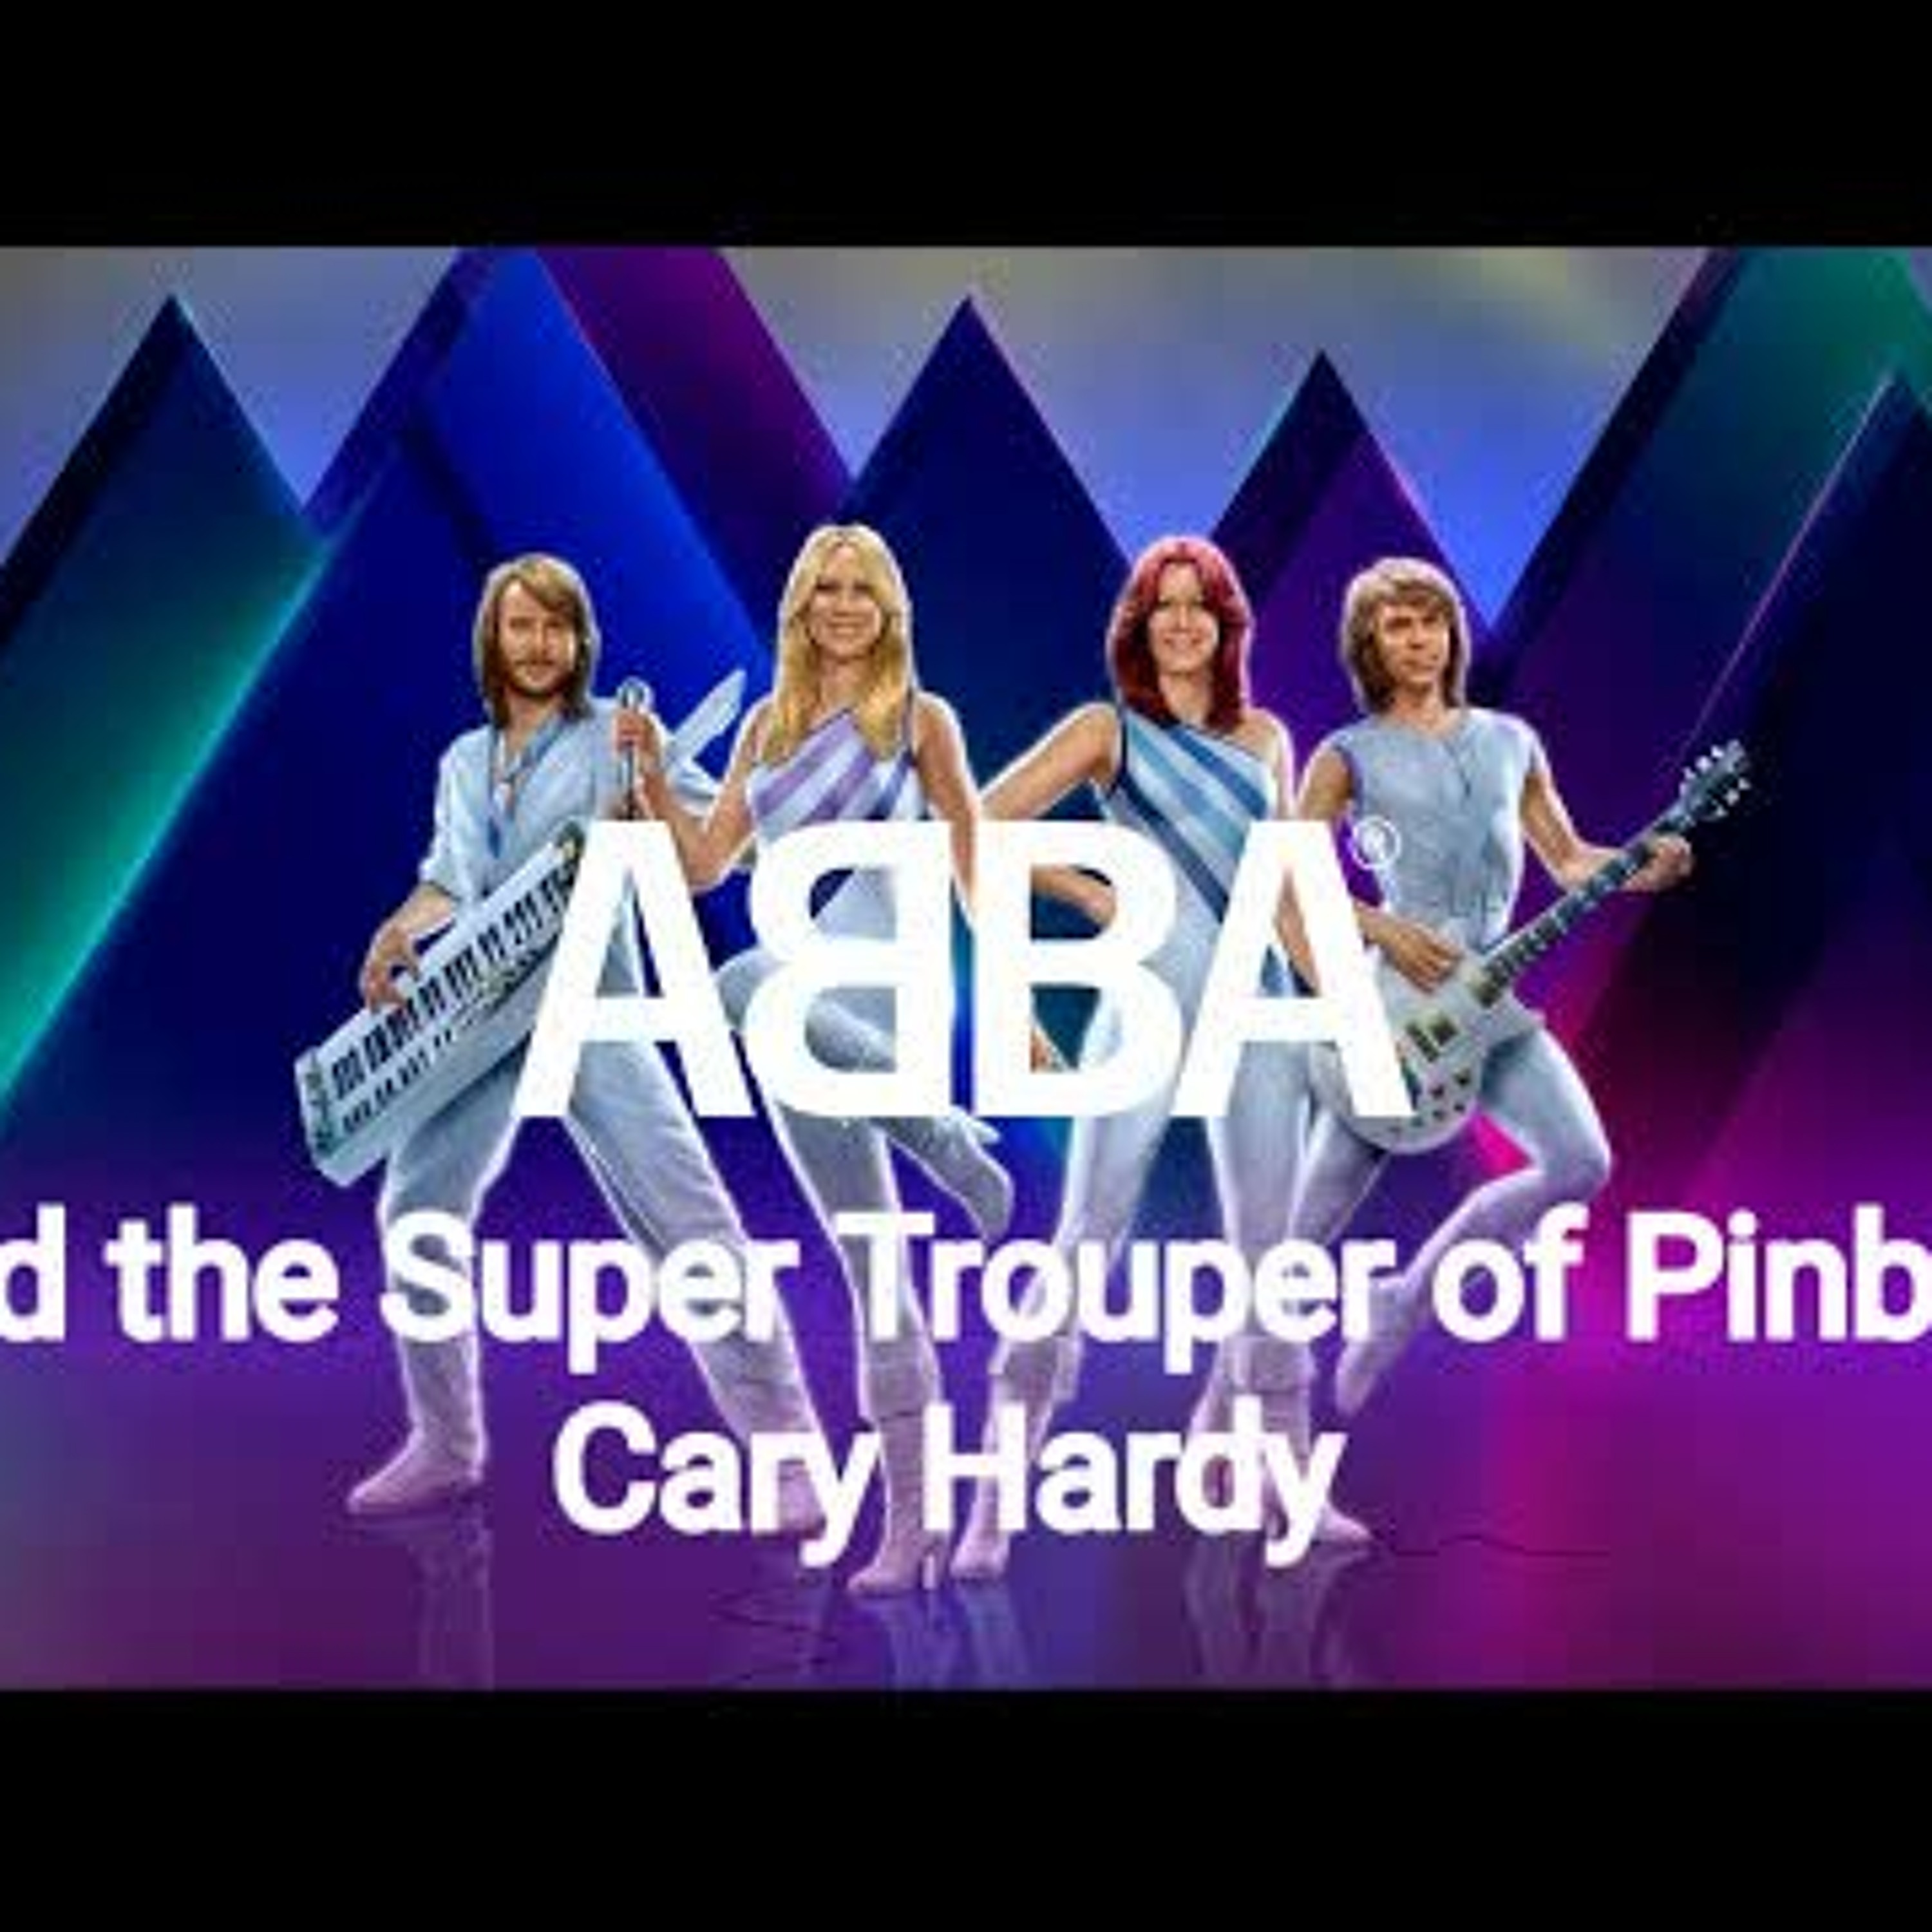 Ep 134: ABBA and the Super Trouper of Pinball Cary Hardy